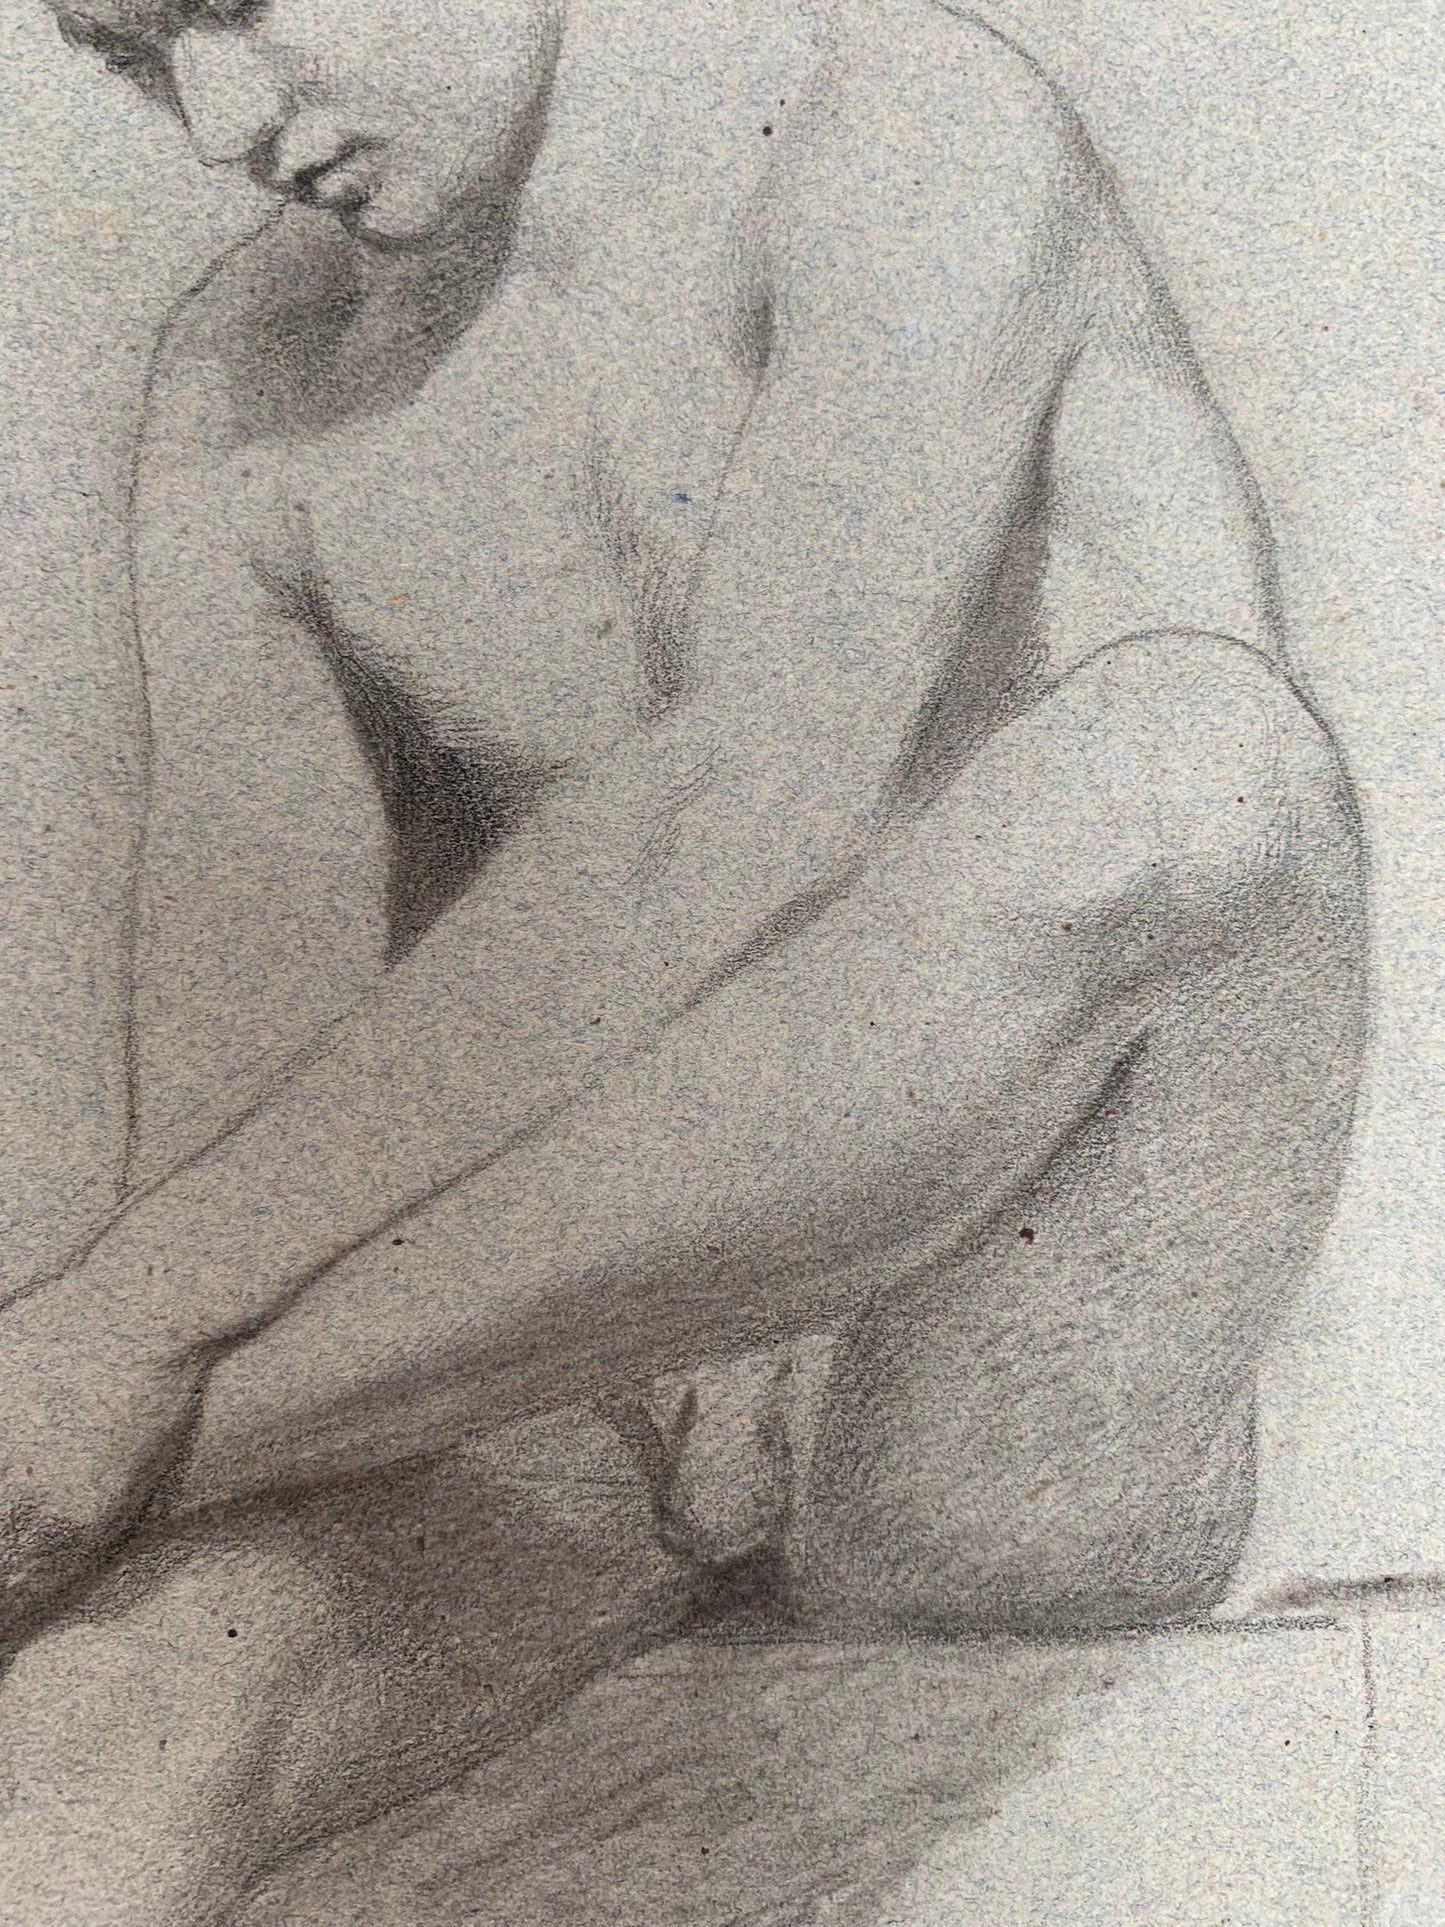 19th century Italian school drawing. Academic study of the figure of the young naked man.